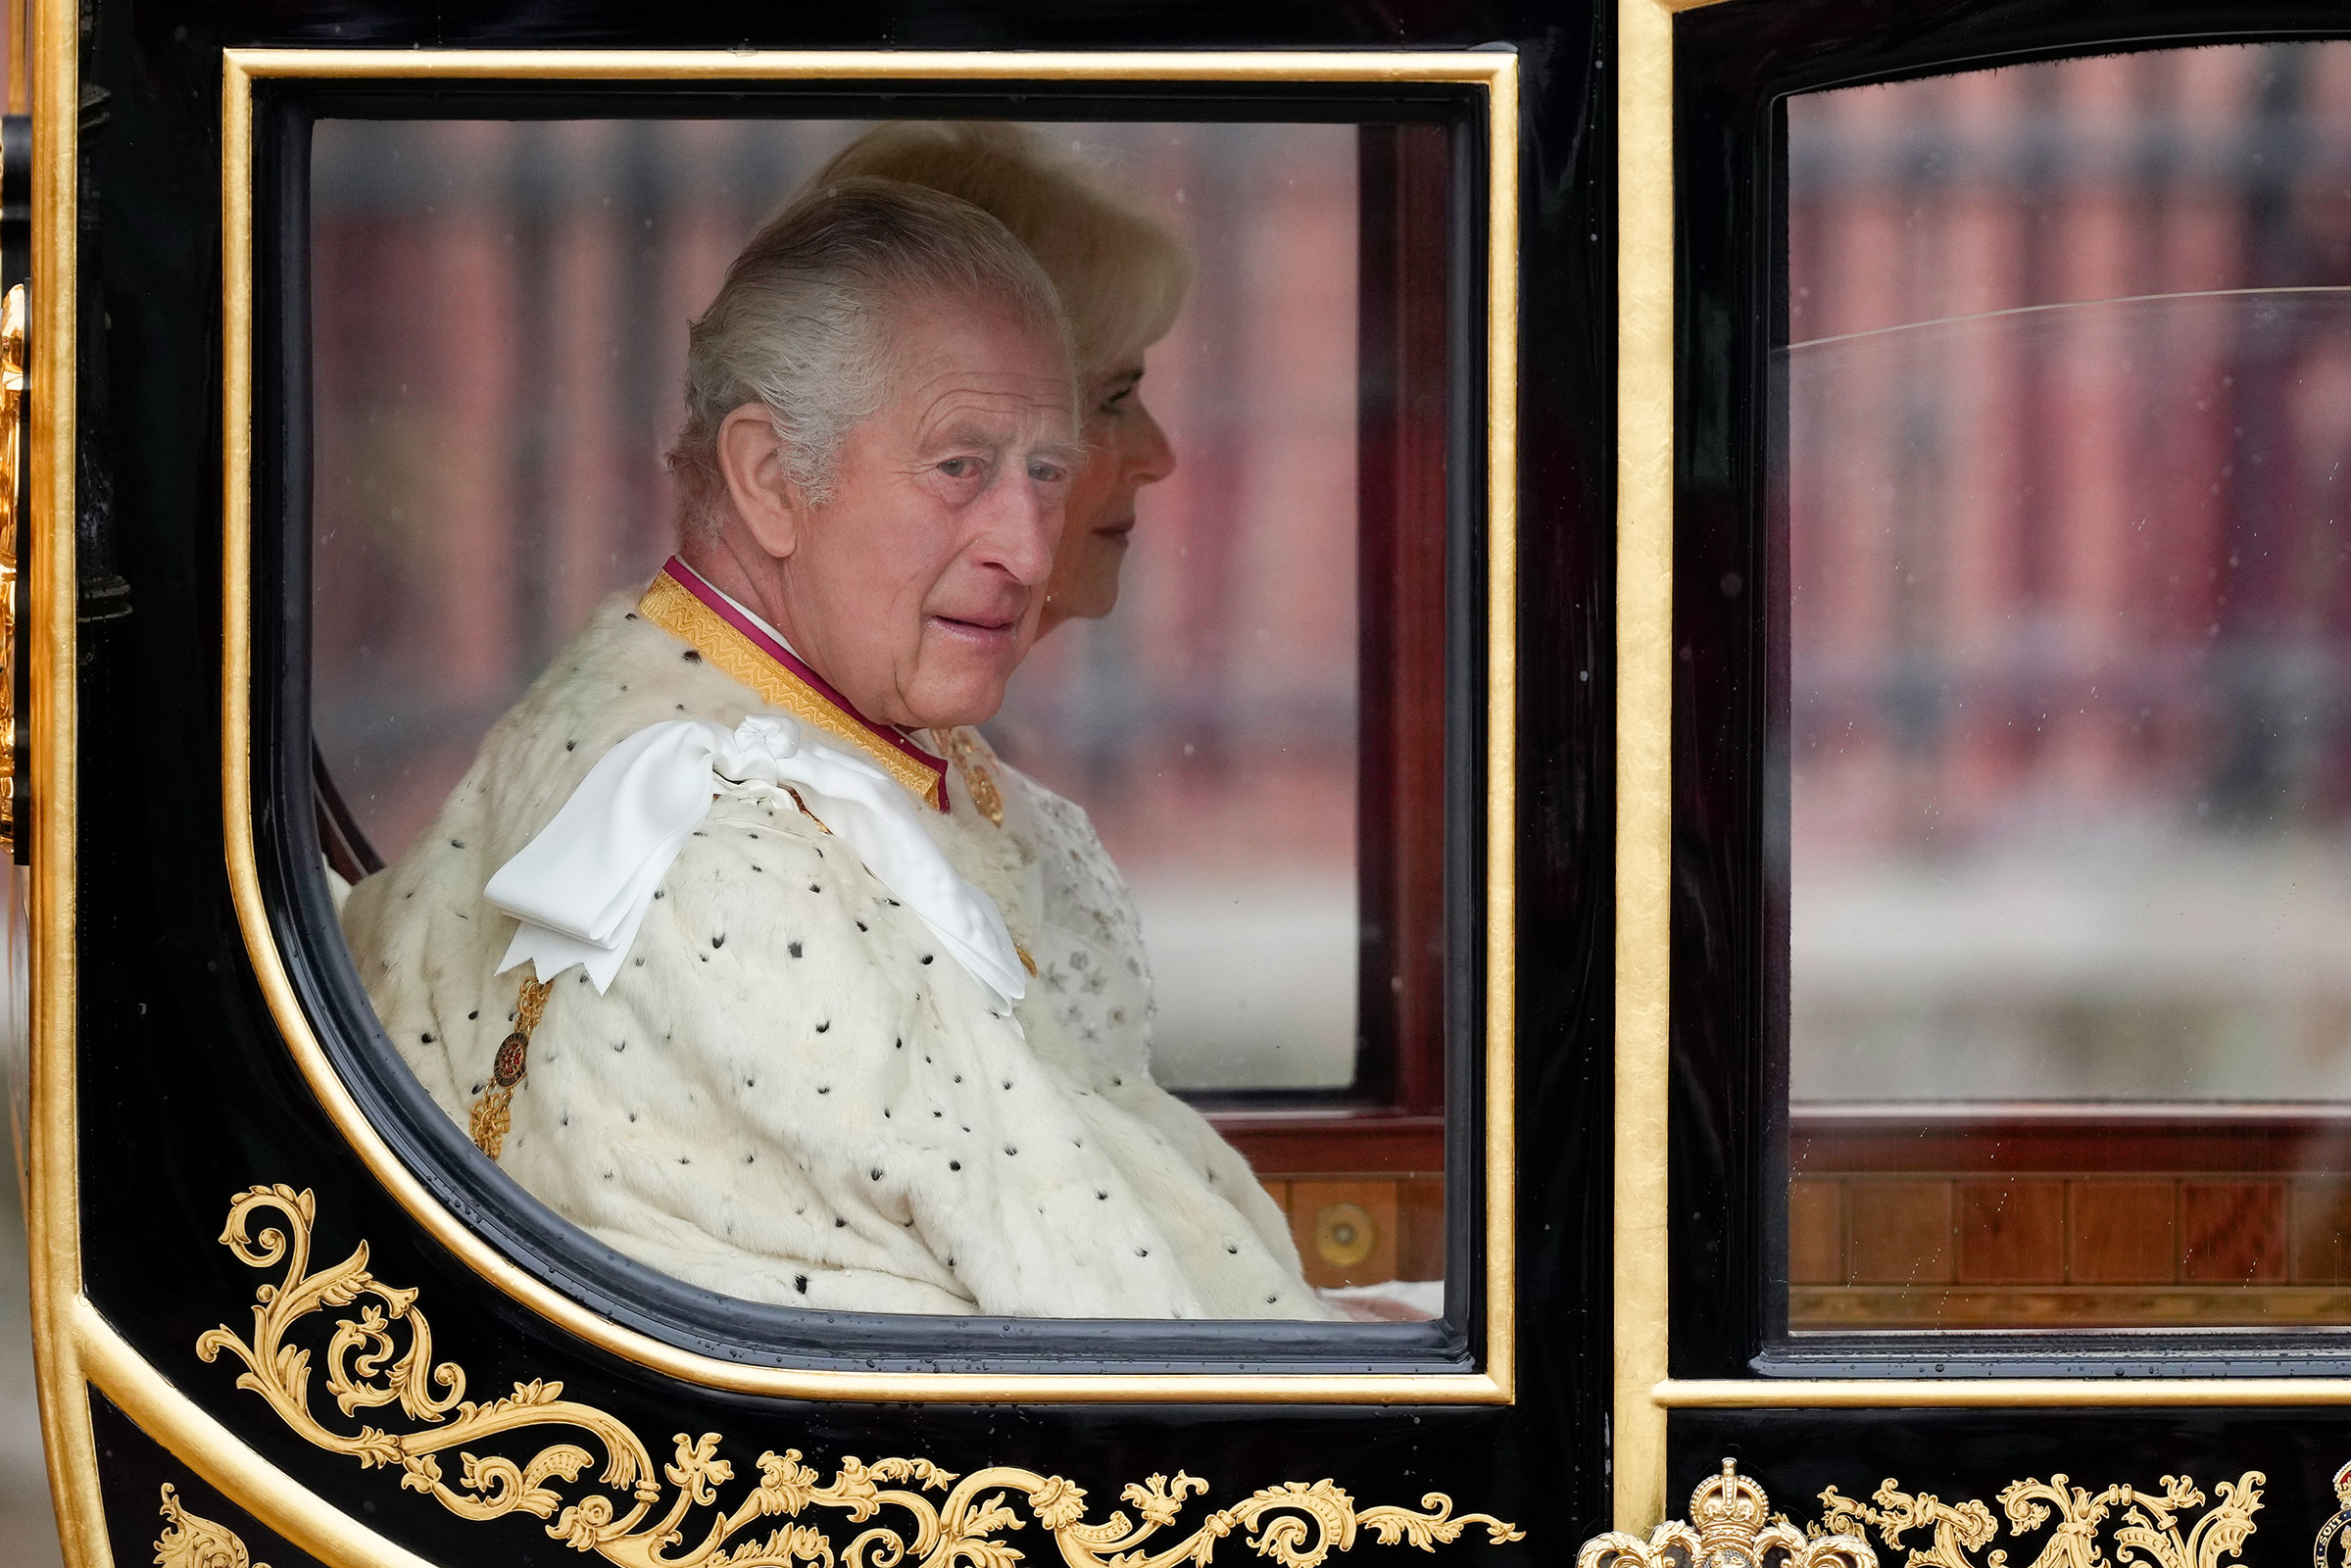 King Charles III and Camilla, Queen Consort traveling in the Diamond Jubilee Coach built in 2012 to commemorate the 60th anniversary of the reign of Queen Elizabeth II at Buckingham Palace ahead of the Coronation of King Charles III and Queen Camilla on Saturday in London. 